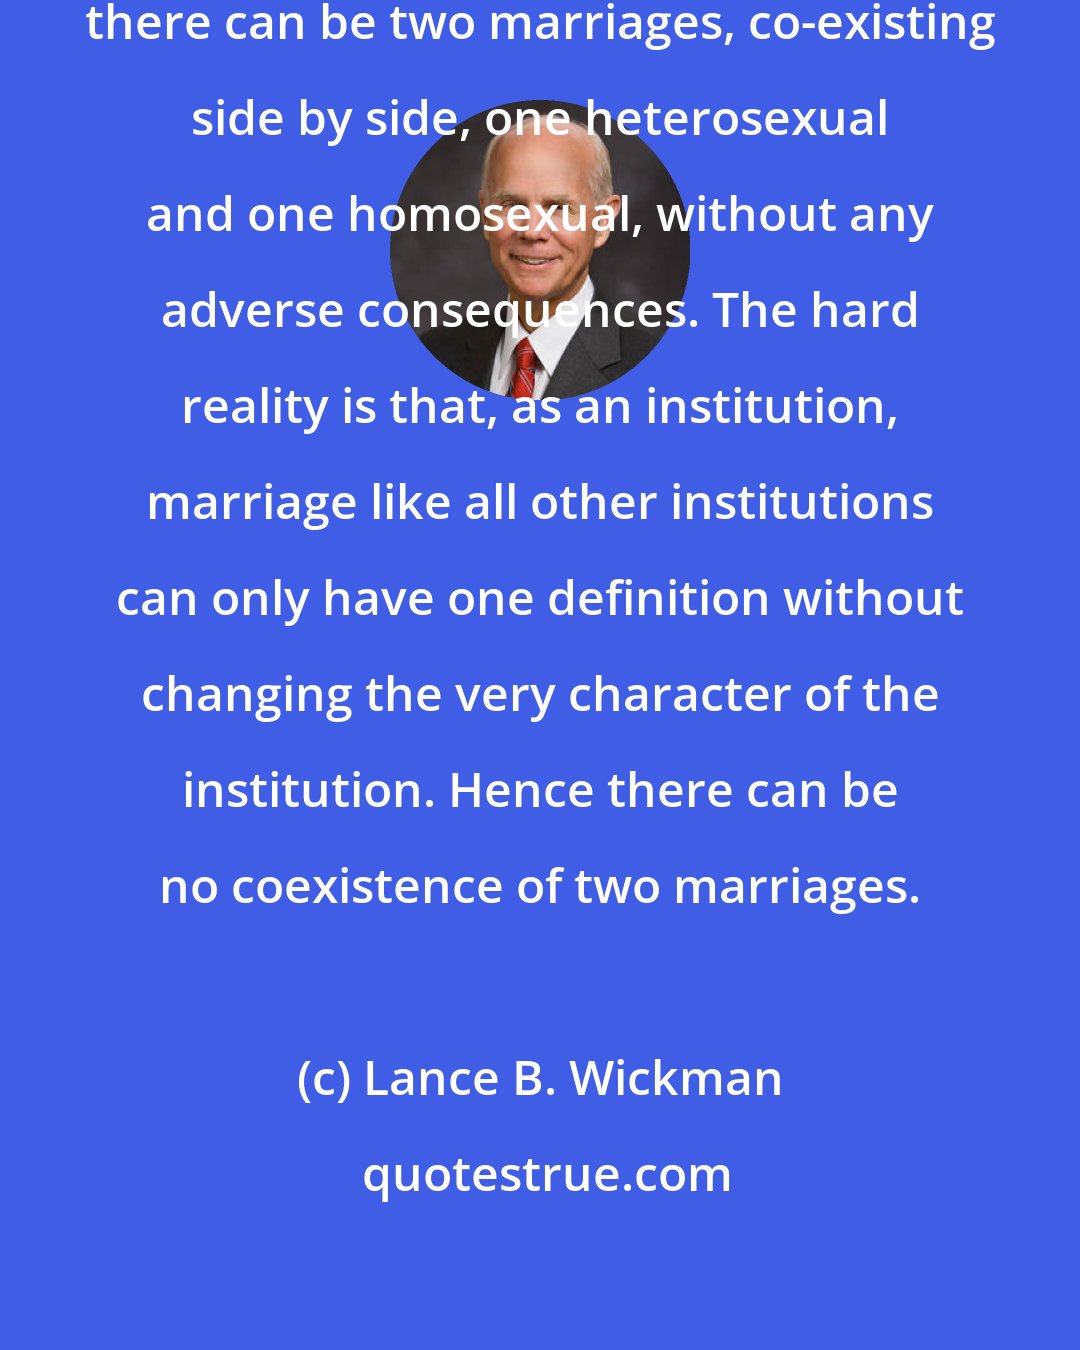 Lance B. Wickman: Some people promote the idea that there can be two marriages, co-existing side by side, one heterosexual and one homosexual, without any adverse consequences. The hard reality is that, as an institution, marriage like all other institutions can only have one definition without changing the very character of the institution. Hence there can be no coexistence of two marriages.